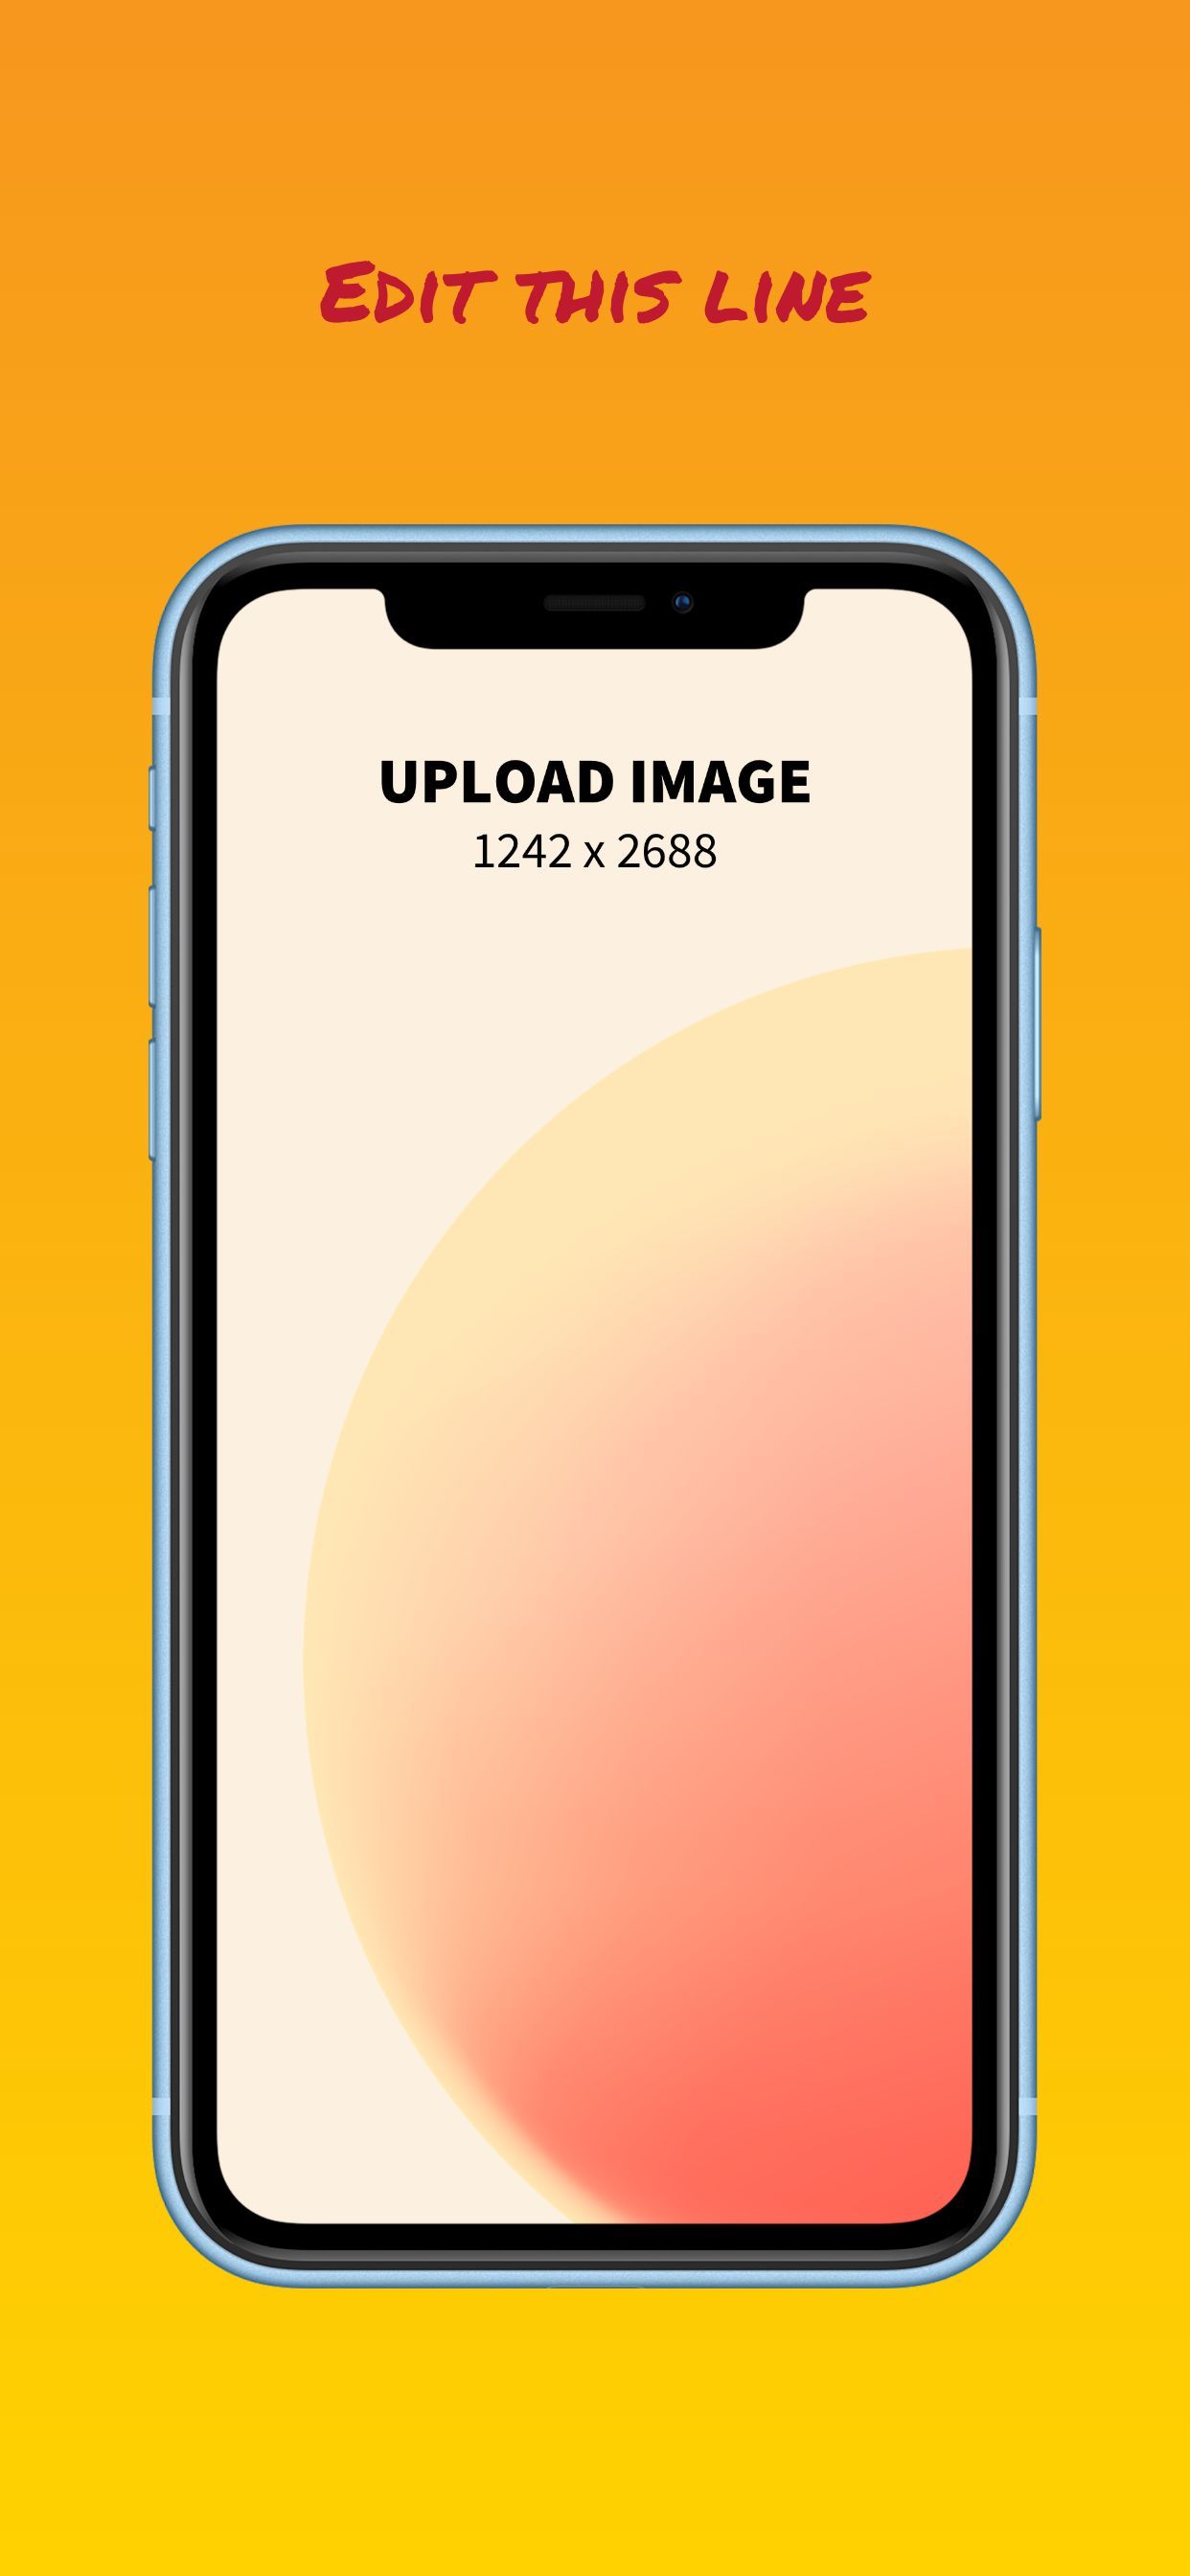 iPhone XS Max Screenshot 66 template. Quickly edit text, colors, images, and more for free.